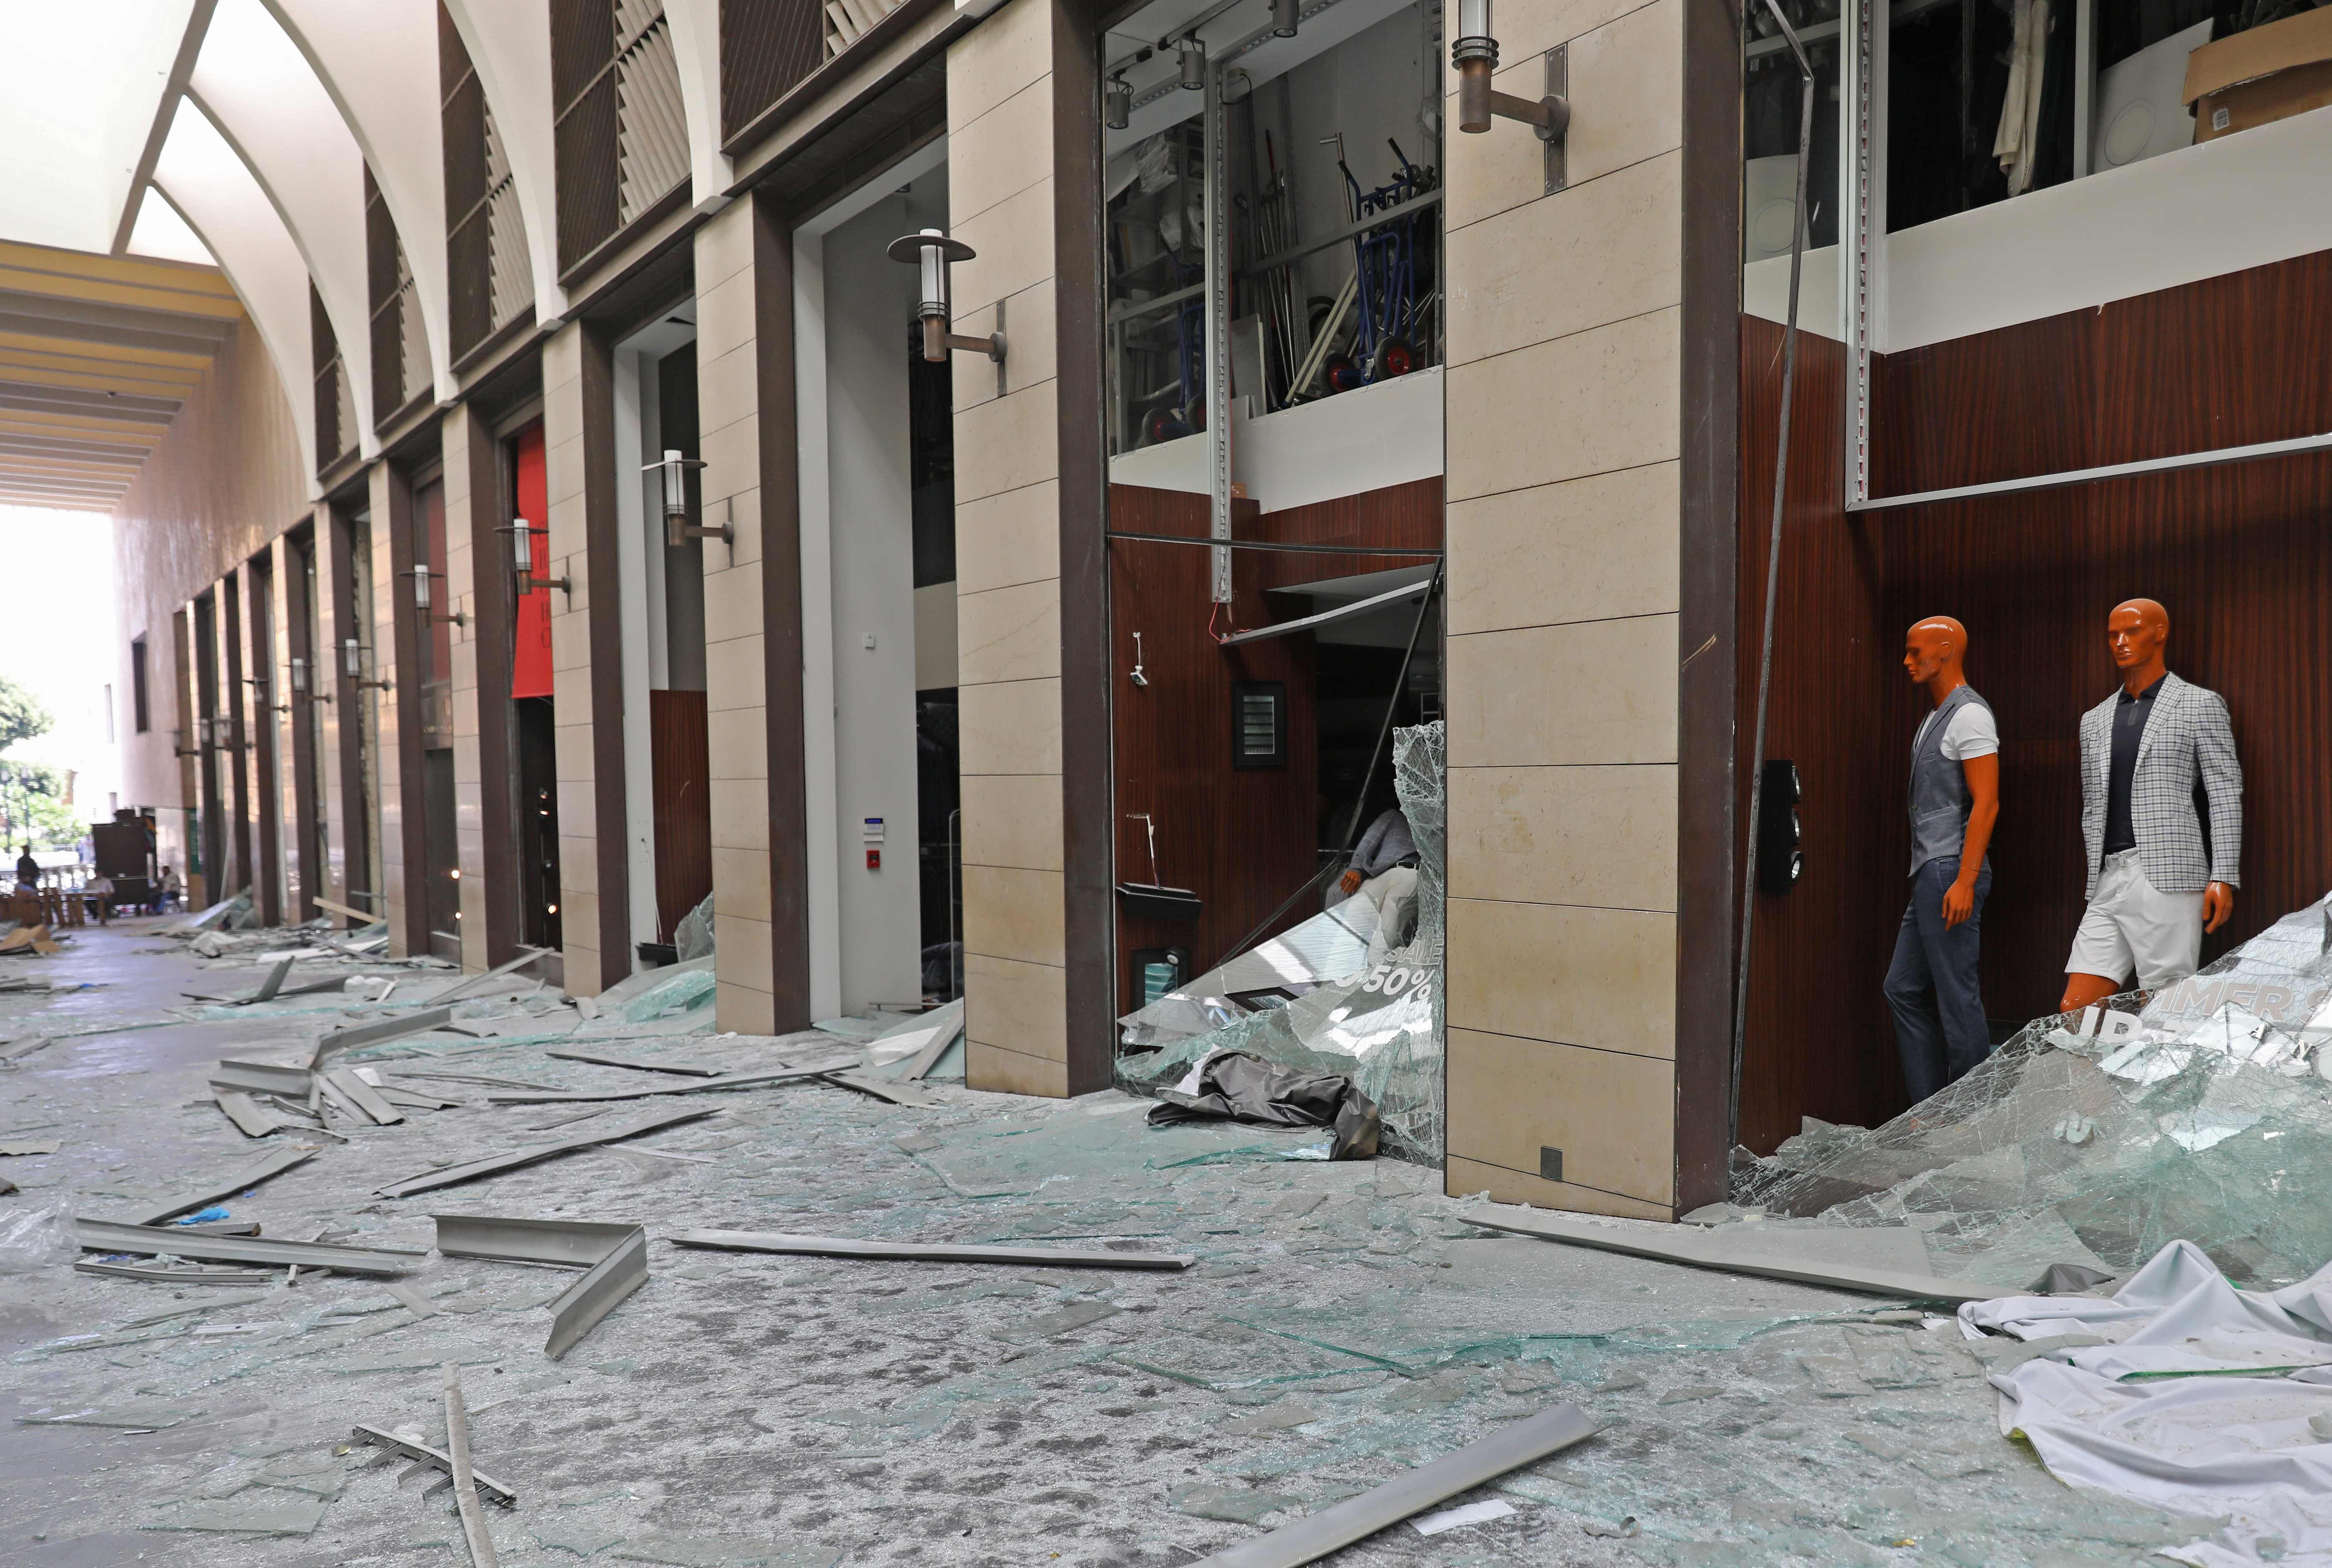 Shattered shop windows are pictured in the aftermath of yesterday's blast that tore through Lebanon's capital and resulted from the ignition of a huge depot of ammonium nitrate at Beirut's port, on August 5, 2020. - Rescuers searched for survivors in Beirut after a cataclysmic explosion at the port sowed devastation across entire neighbourhoods, killing more than 100 people, wounding thousands and plunging Lebanon deeper into crisis. Credit: AFP